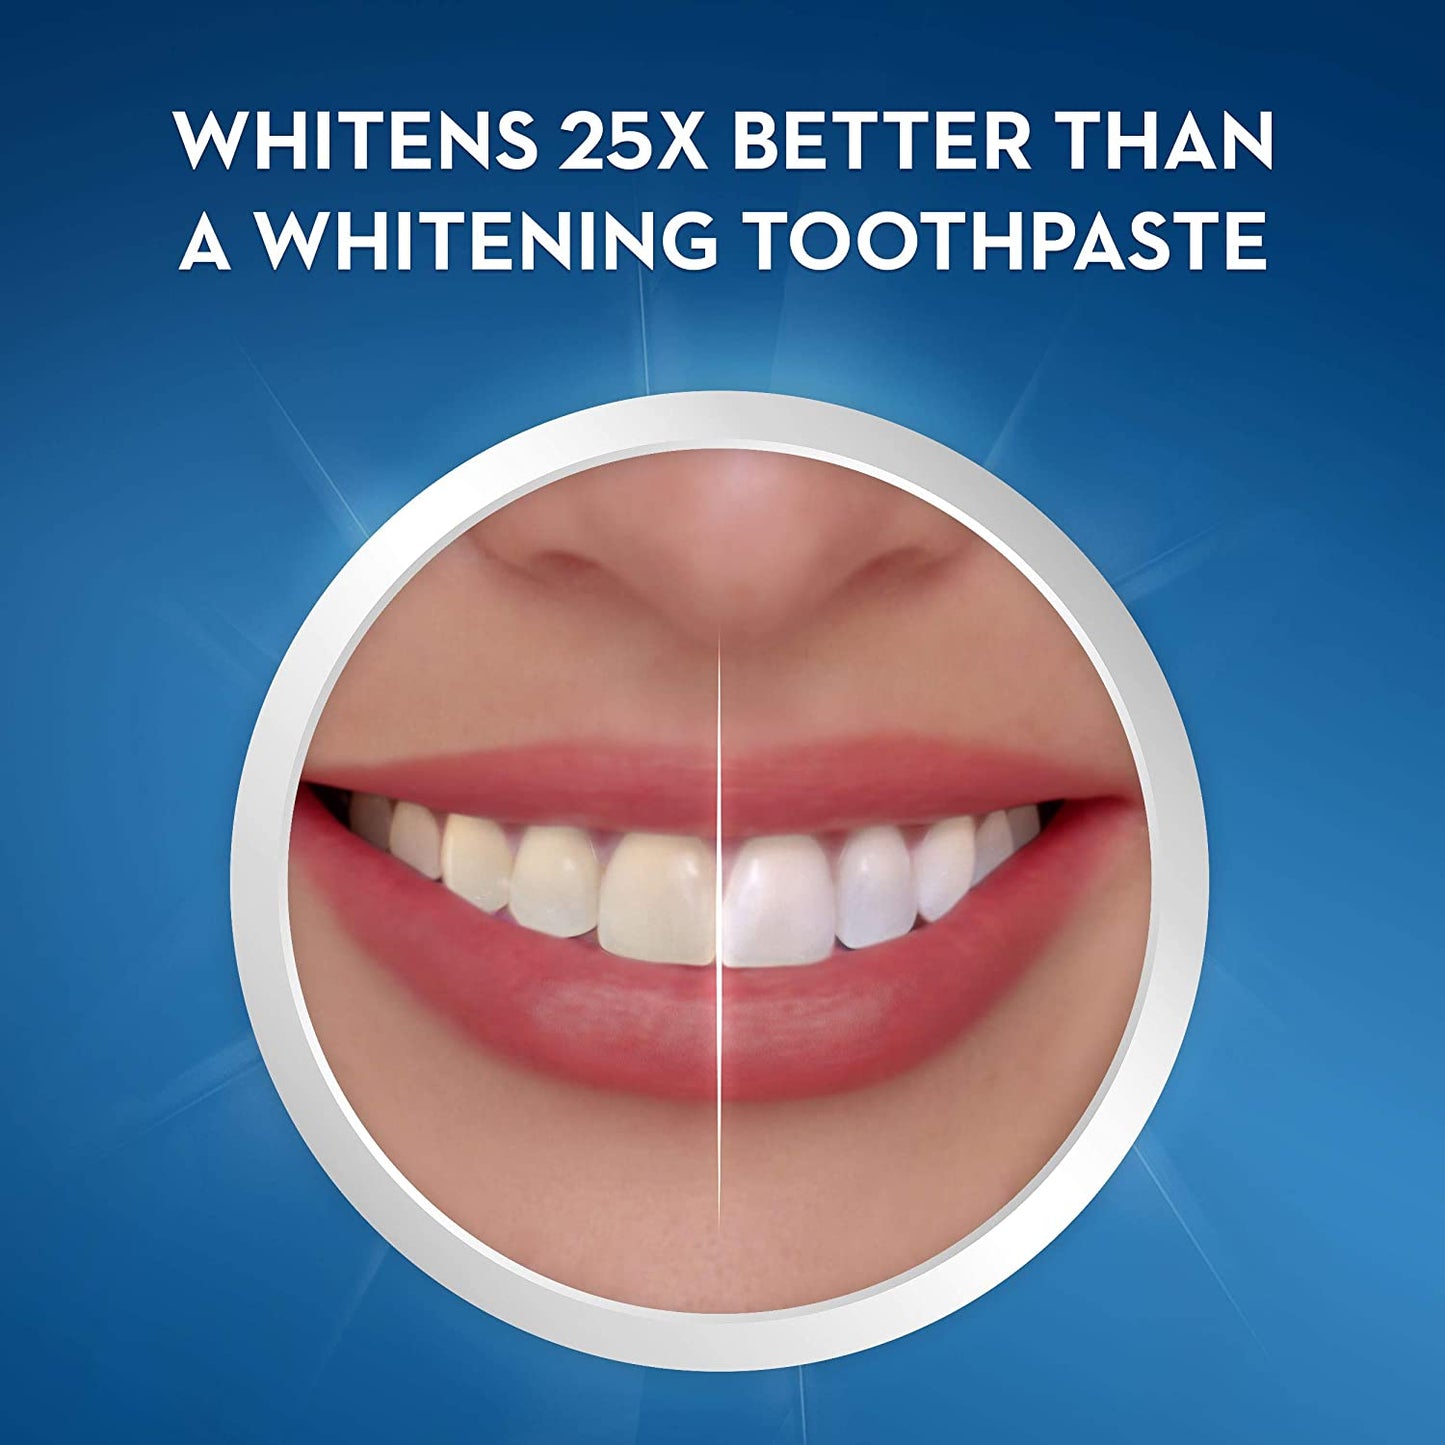 Crest 3D Whitestrips - Tooth Whitening Kit, 16 Treatments (32 Individual Strips) + 2 Express 1-Hour Treatments